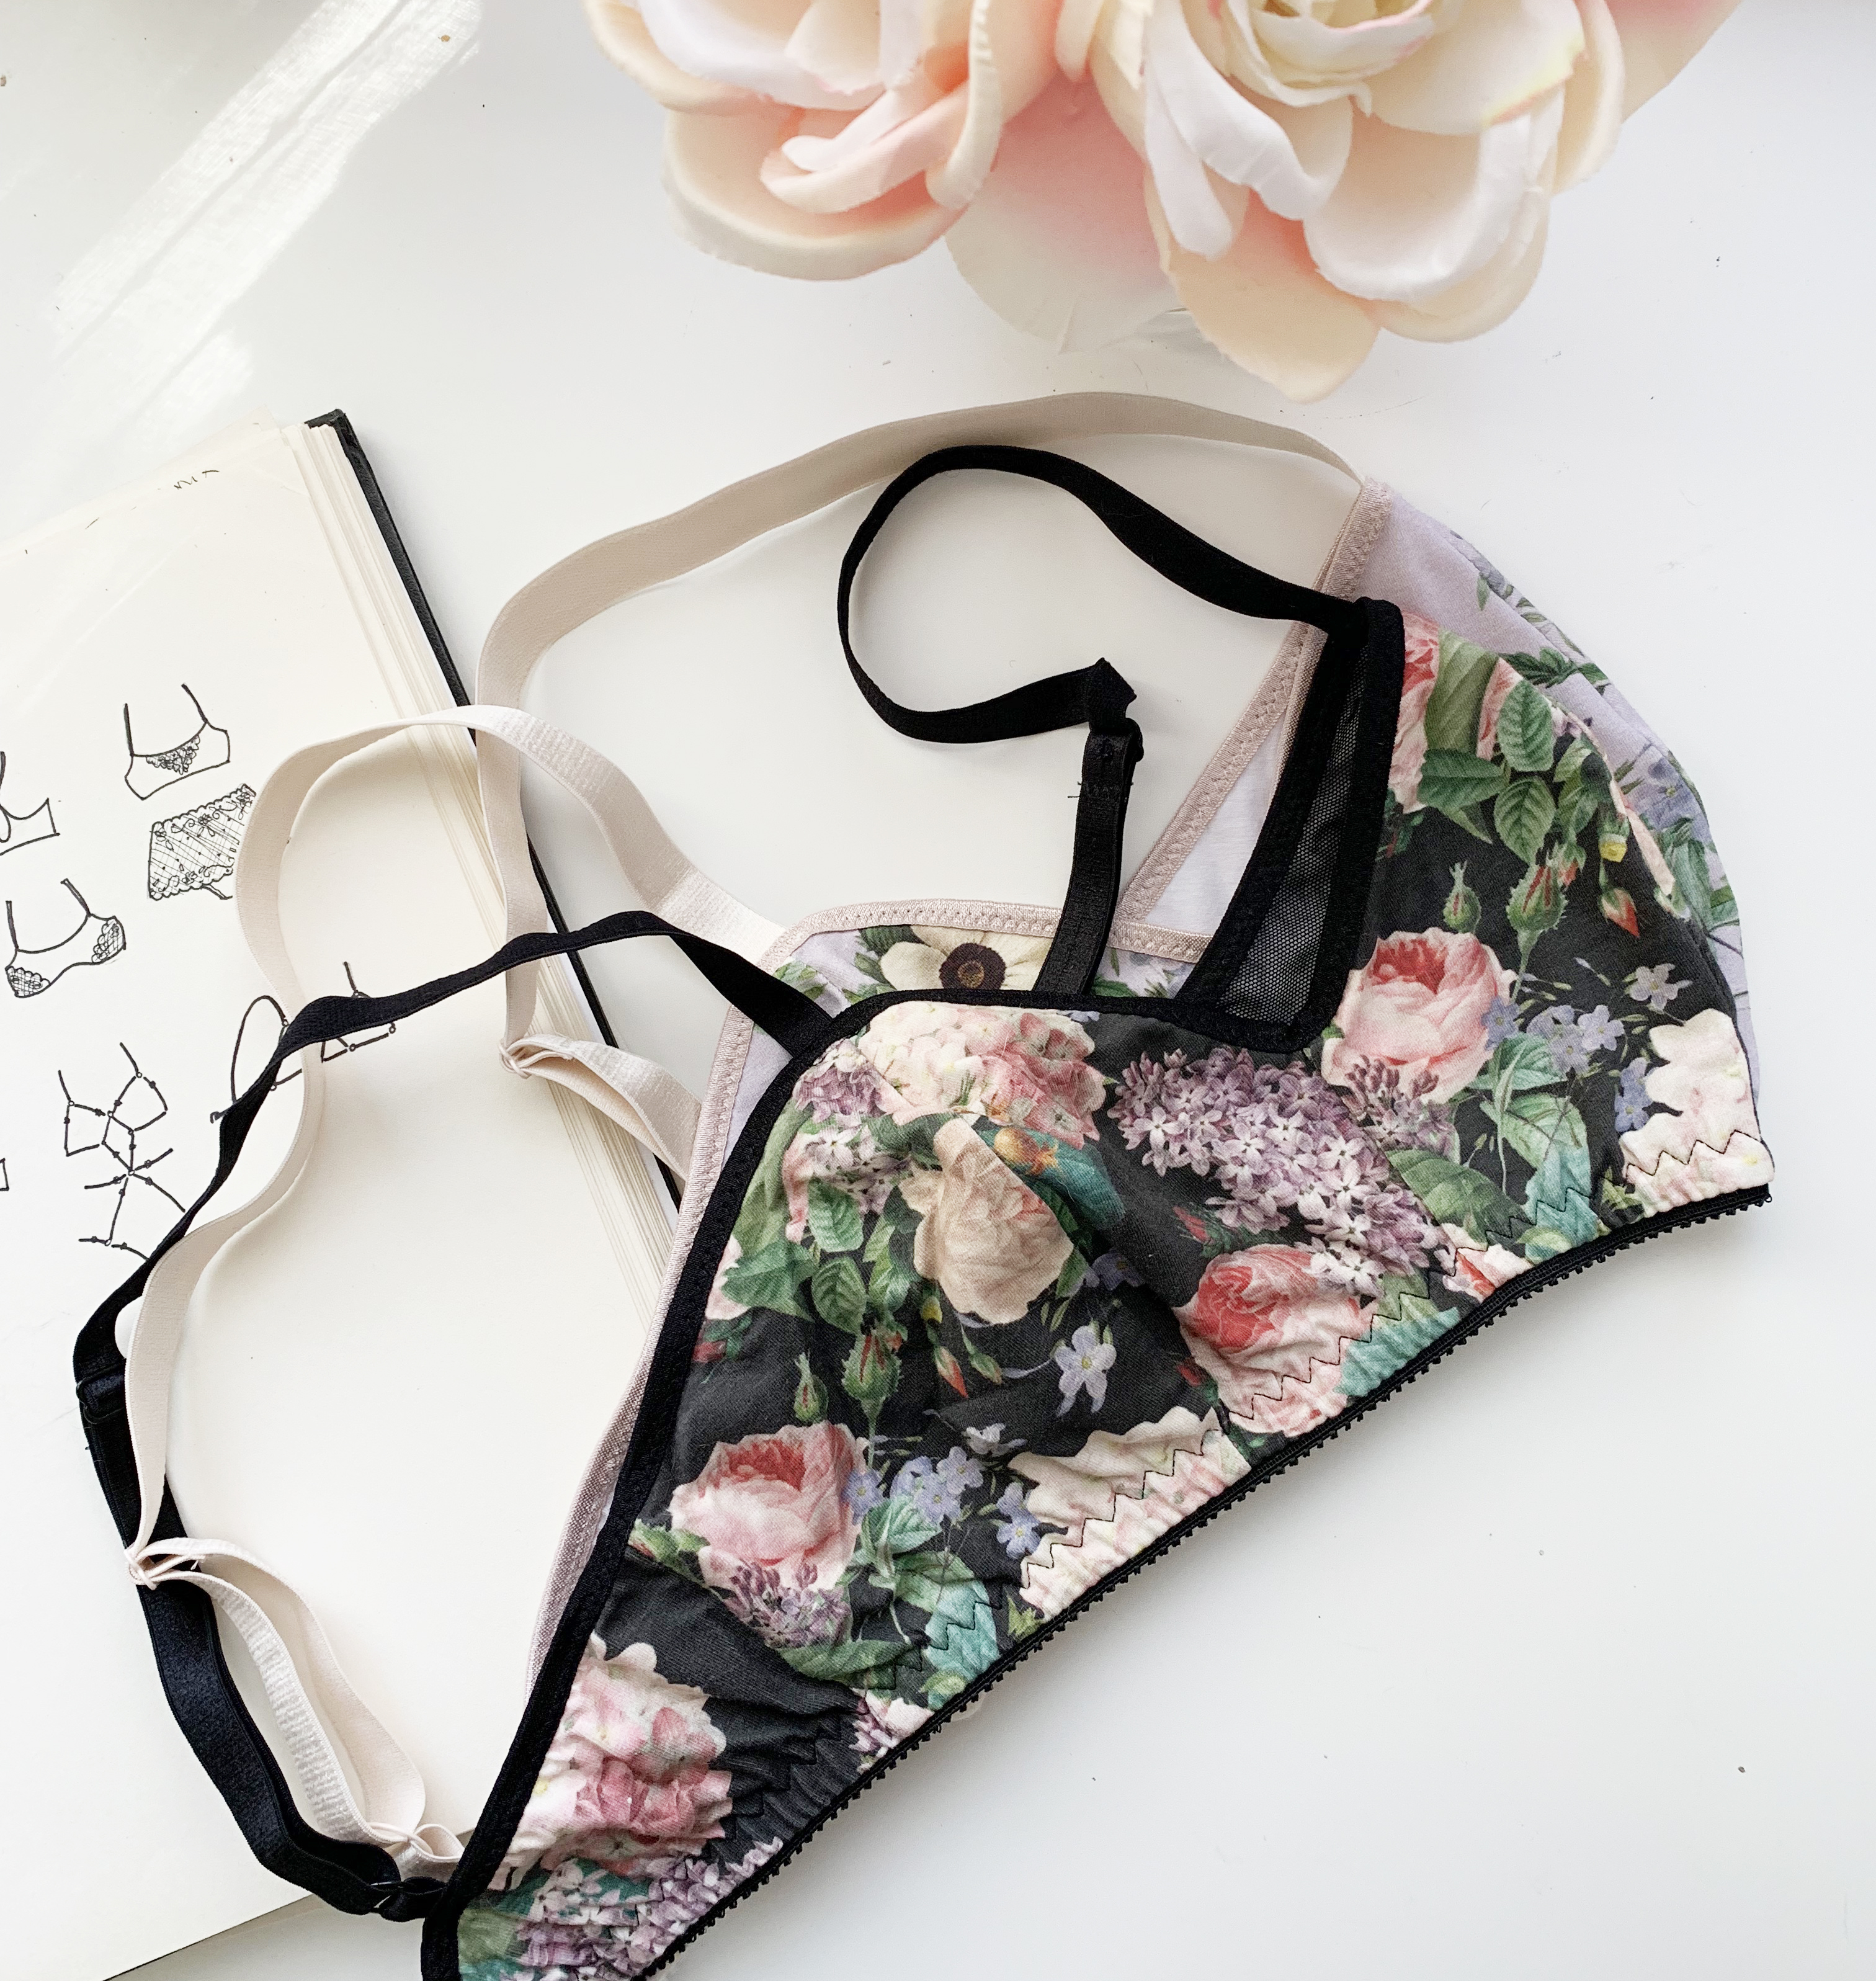 Jasmine Bra in pink and gold lace from Ohhh Lulu / Bralette rosa y oro –  Costura Secret Shop